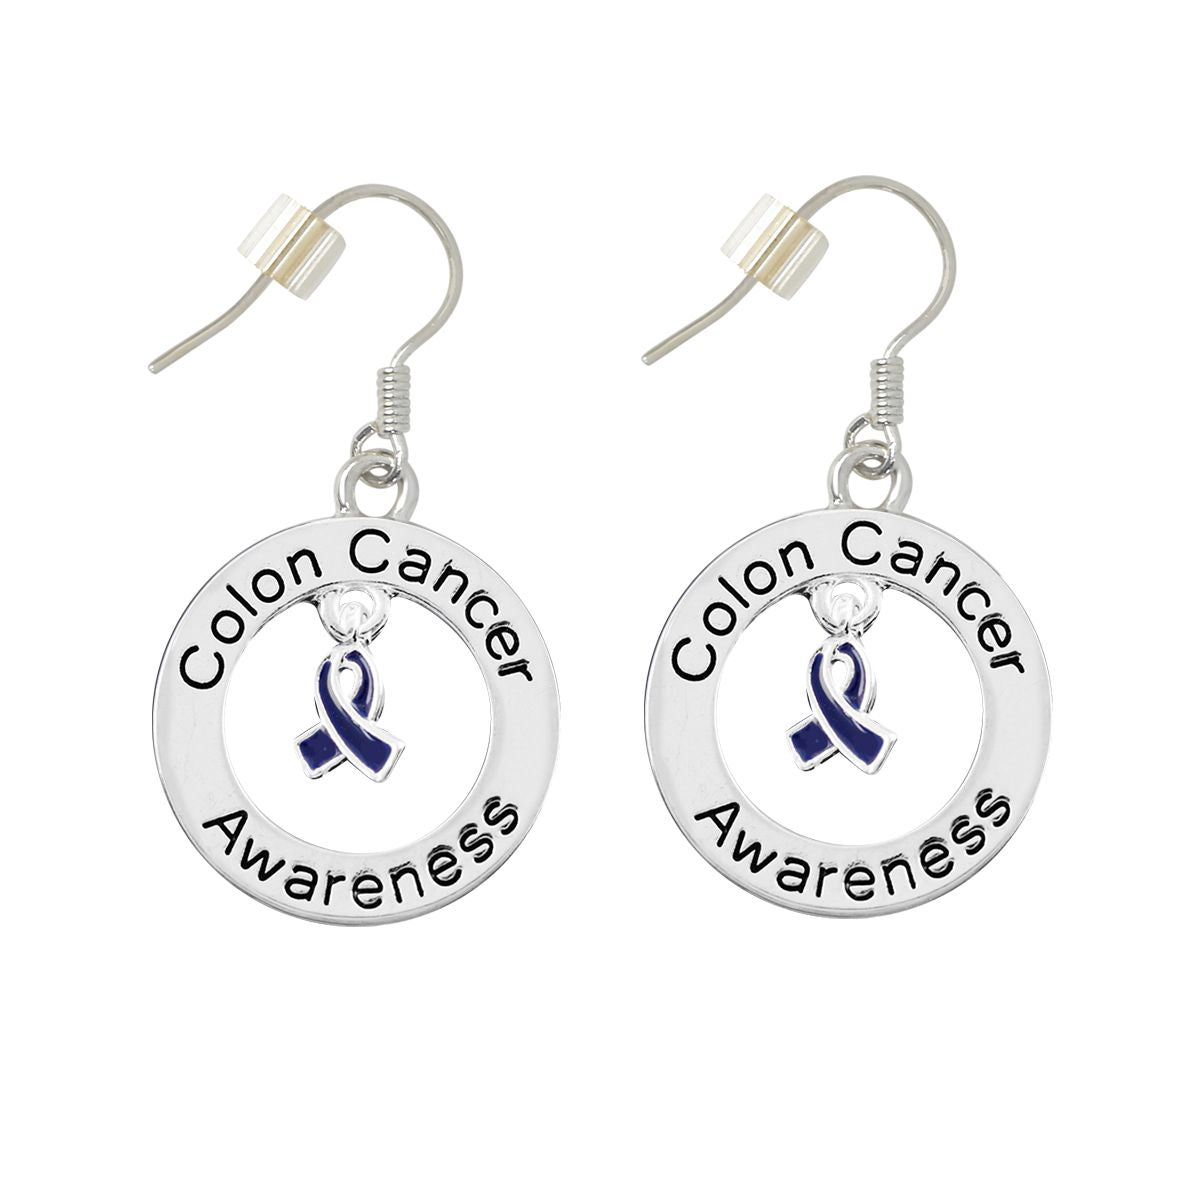 Colon Cancer Awareness Hanging Earrings - Fundraising For A Cause